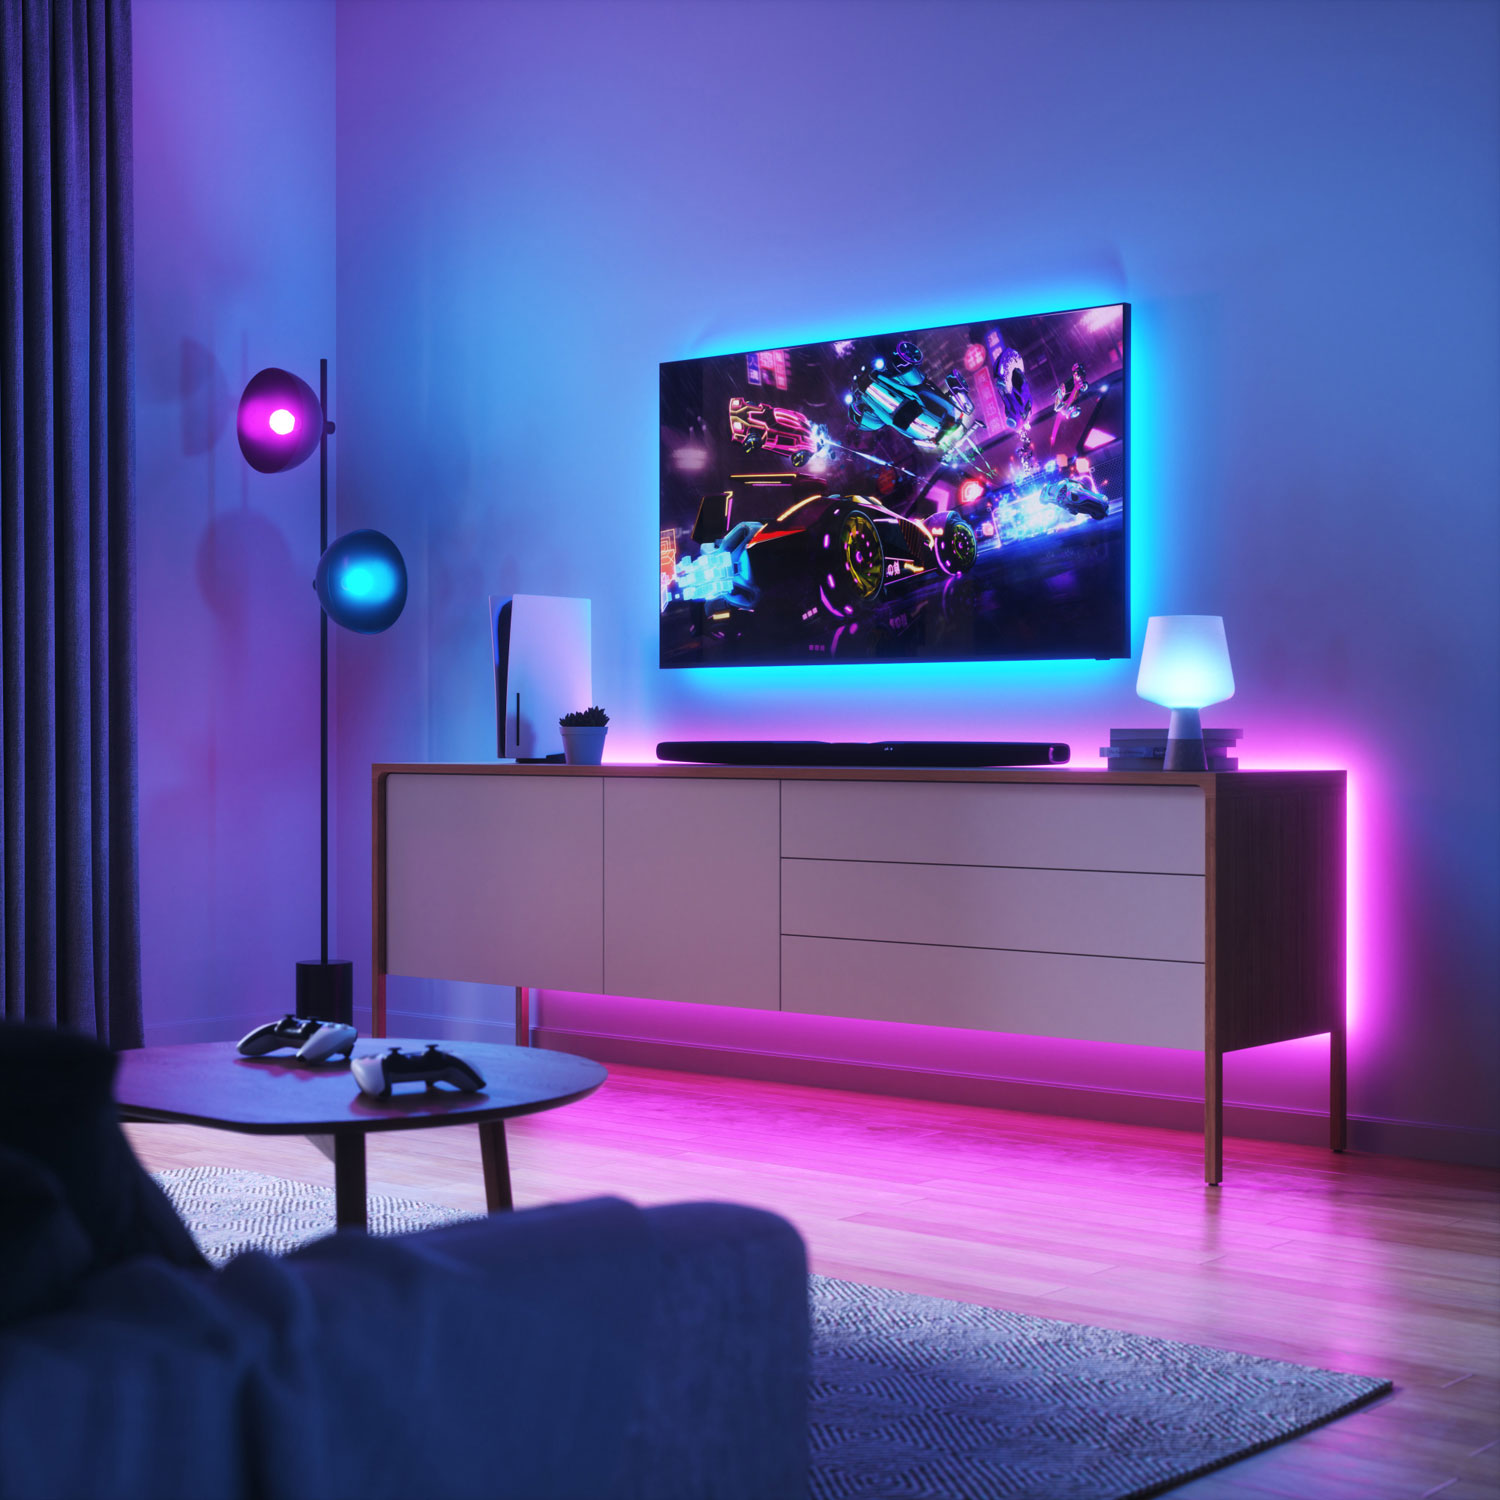 Decorate your home with cool smart lights